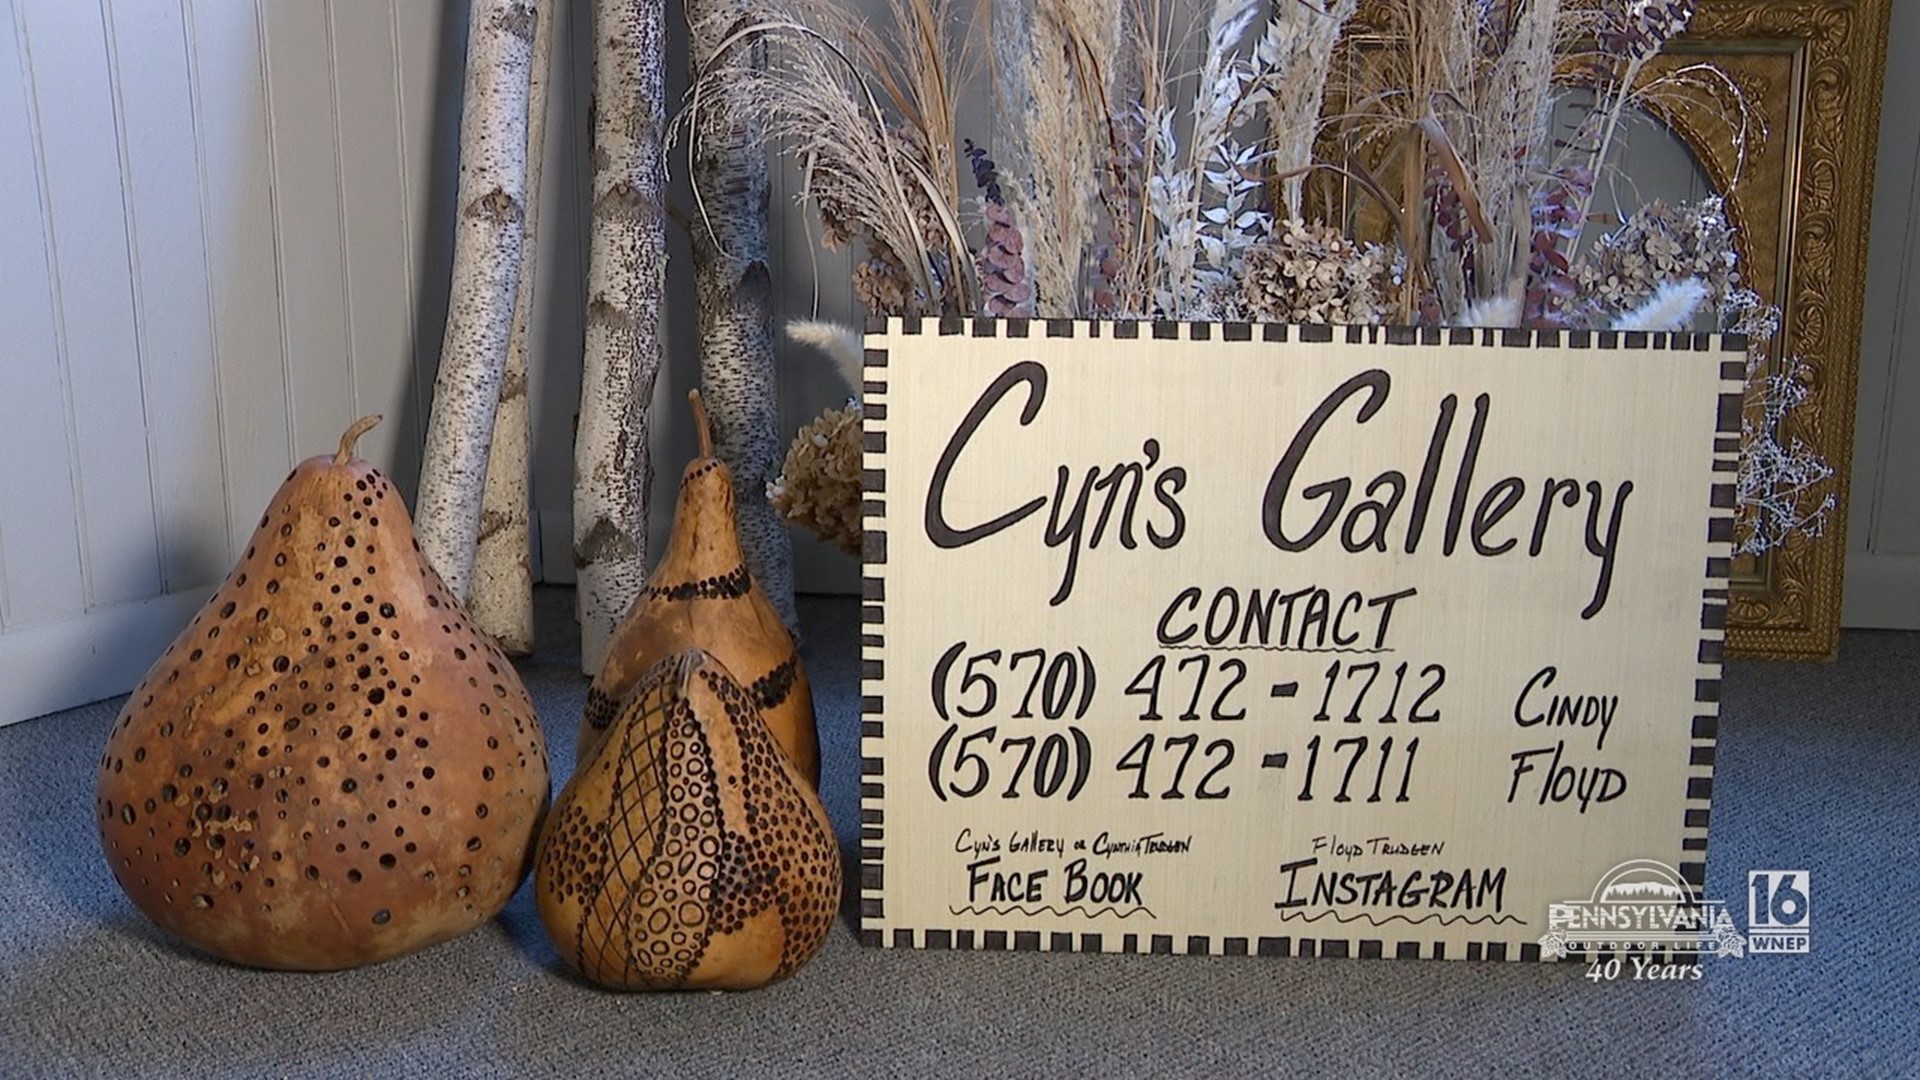 A gallery in the back mountain filled with local artwork and wildlife photography.